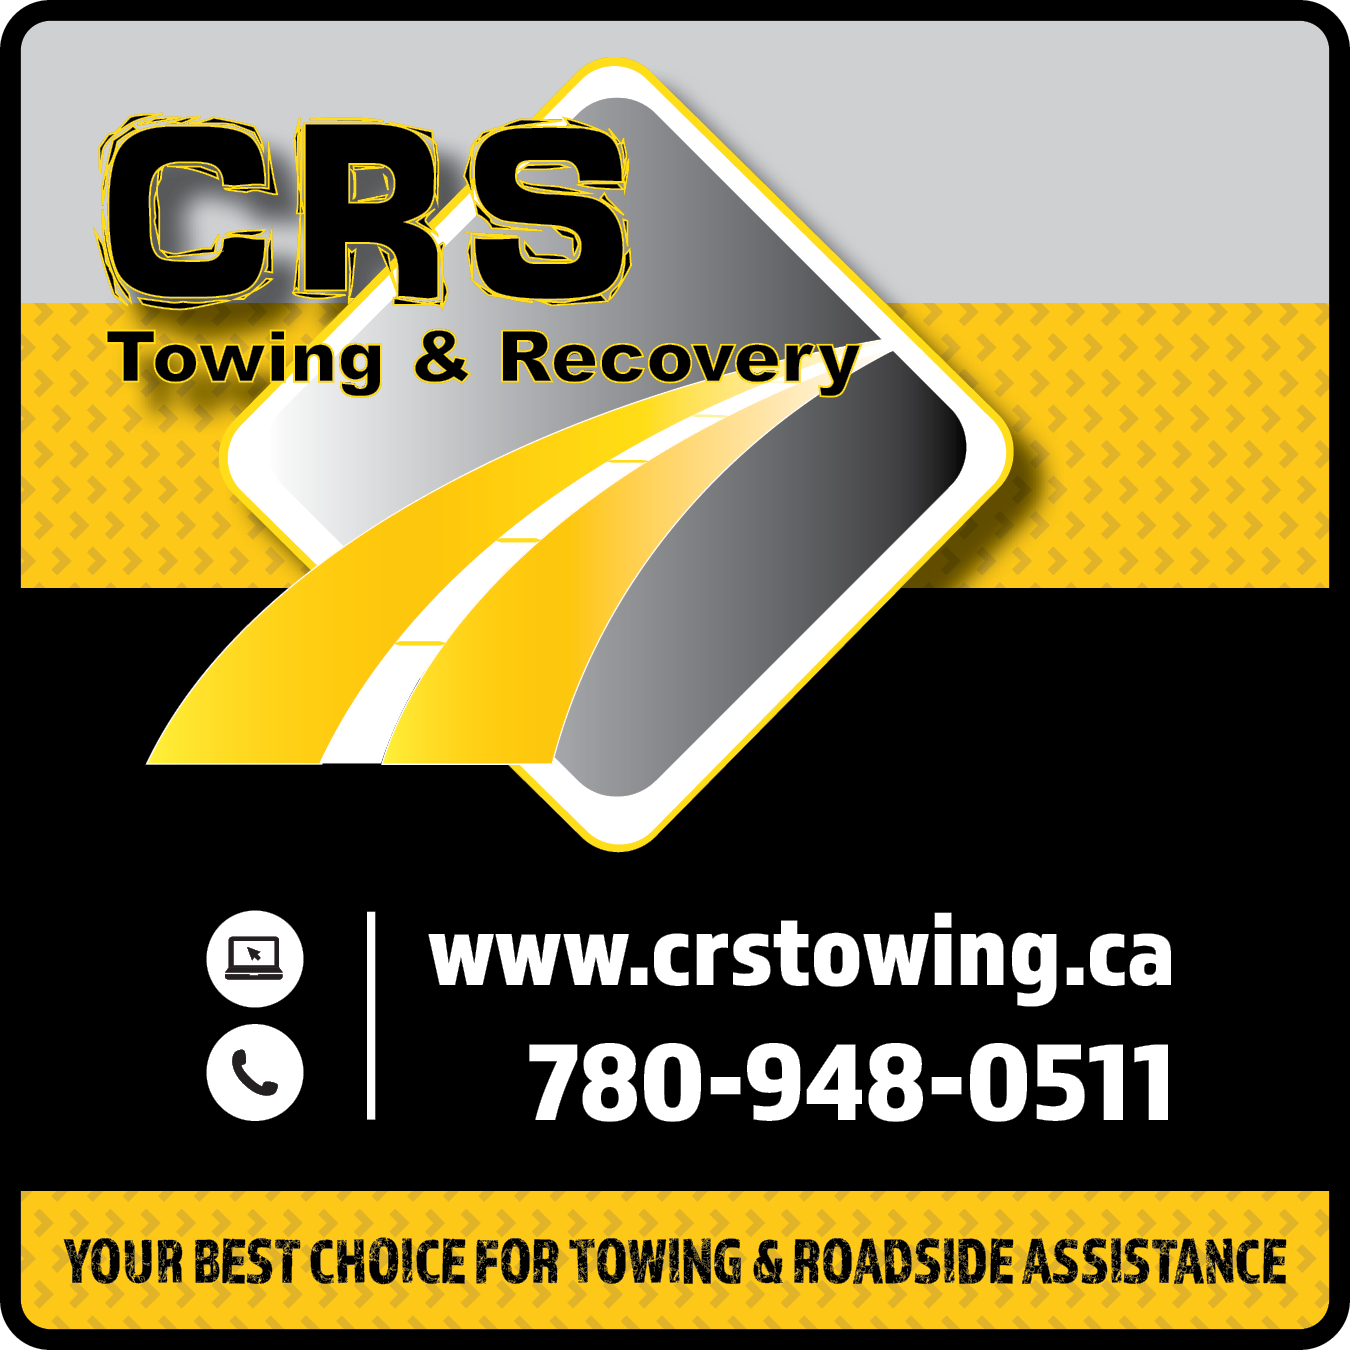 CRS Towing & Recovery